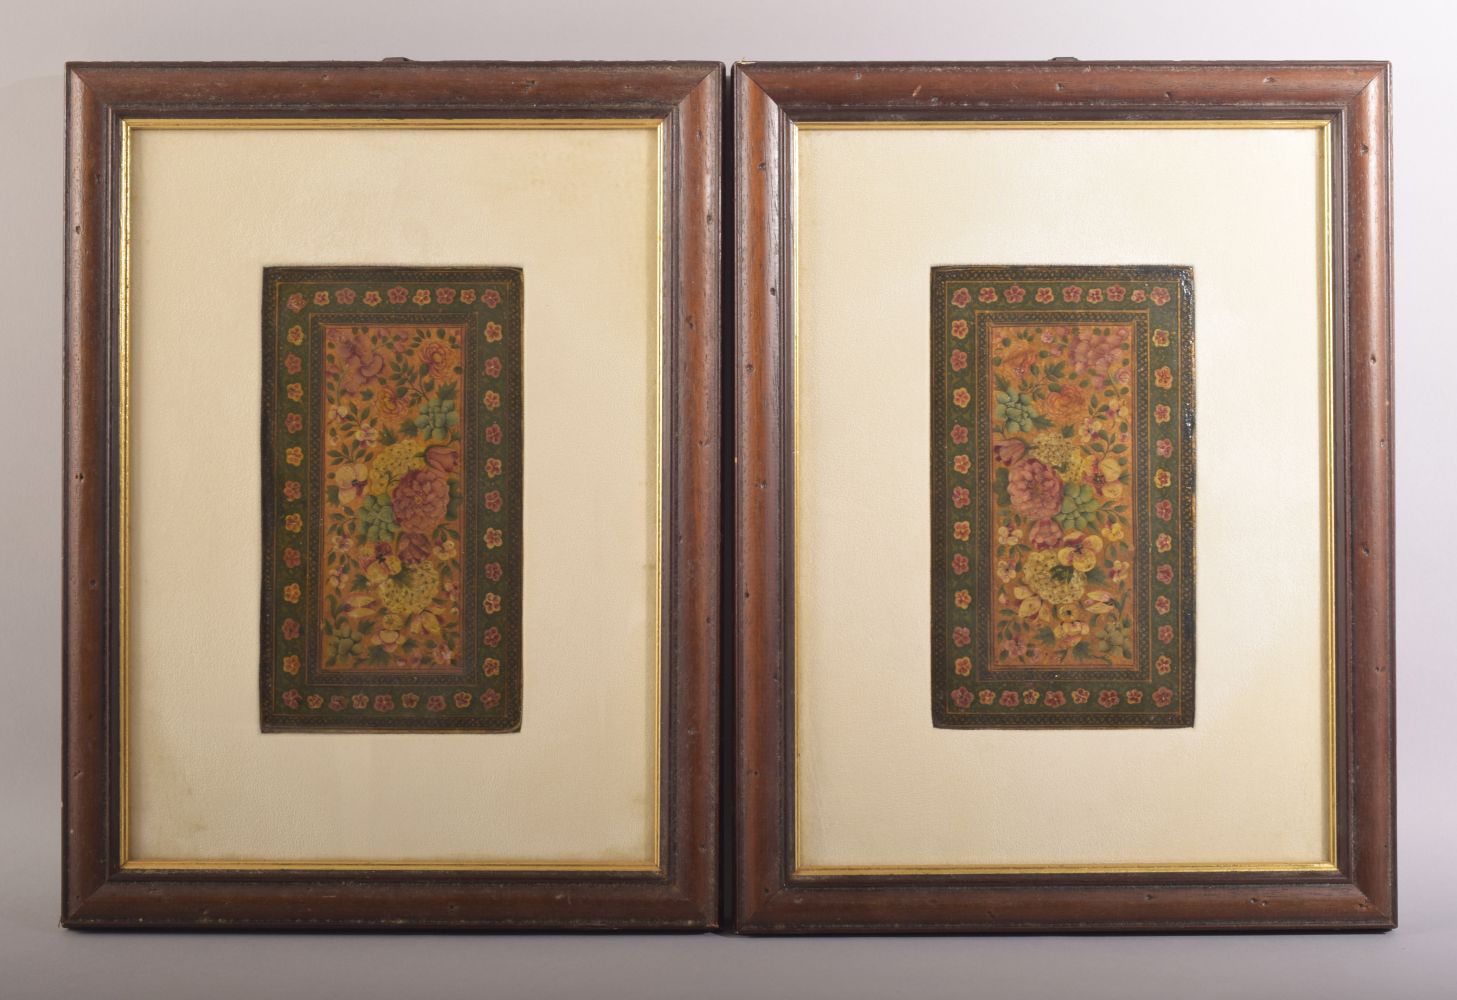 AN EARLY PAIR OF PERSIAN PANELS / COVERS - possibly for a mirror or Quran, painted with flowers,